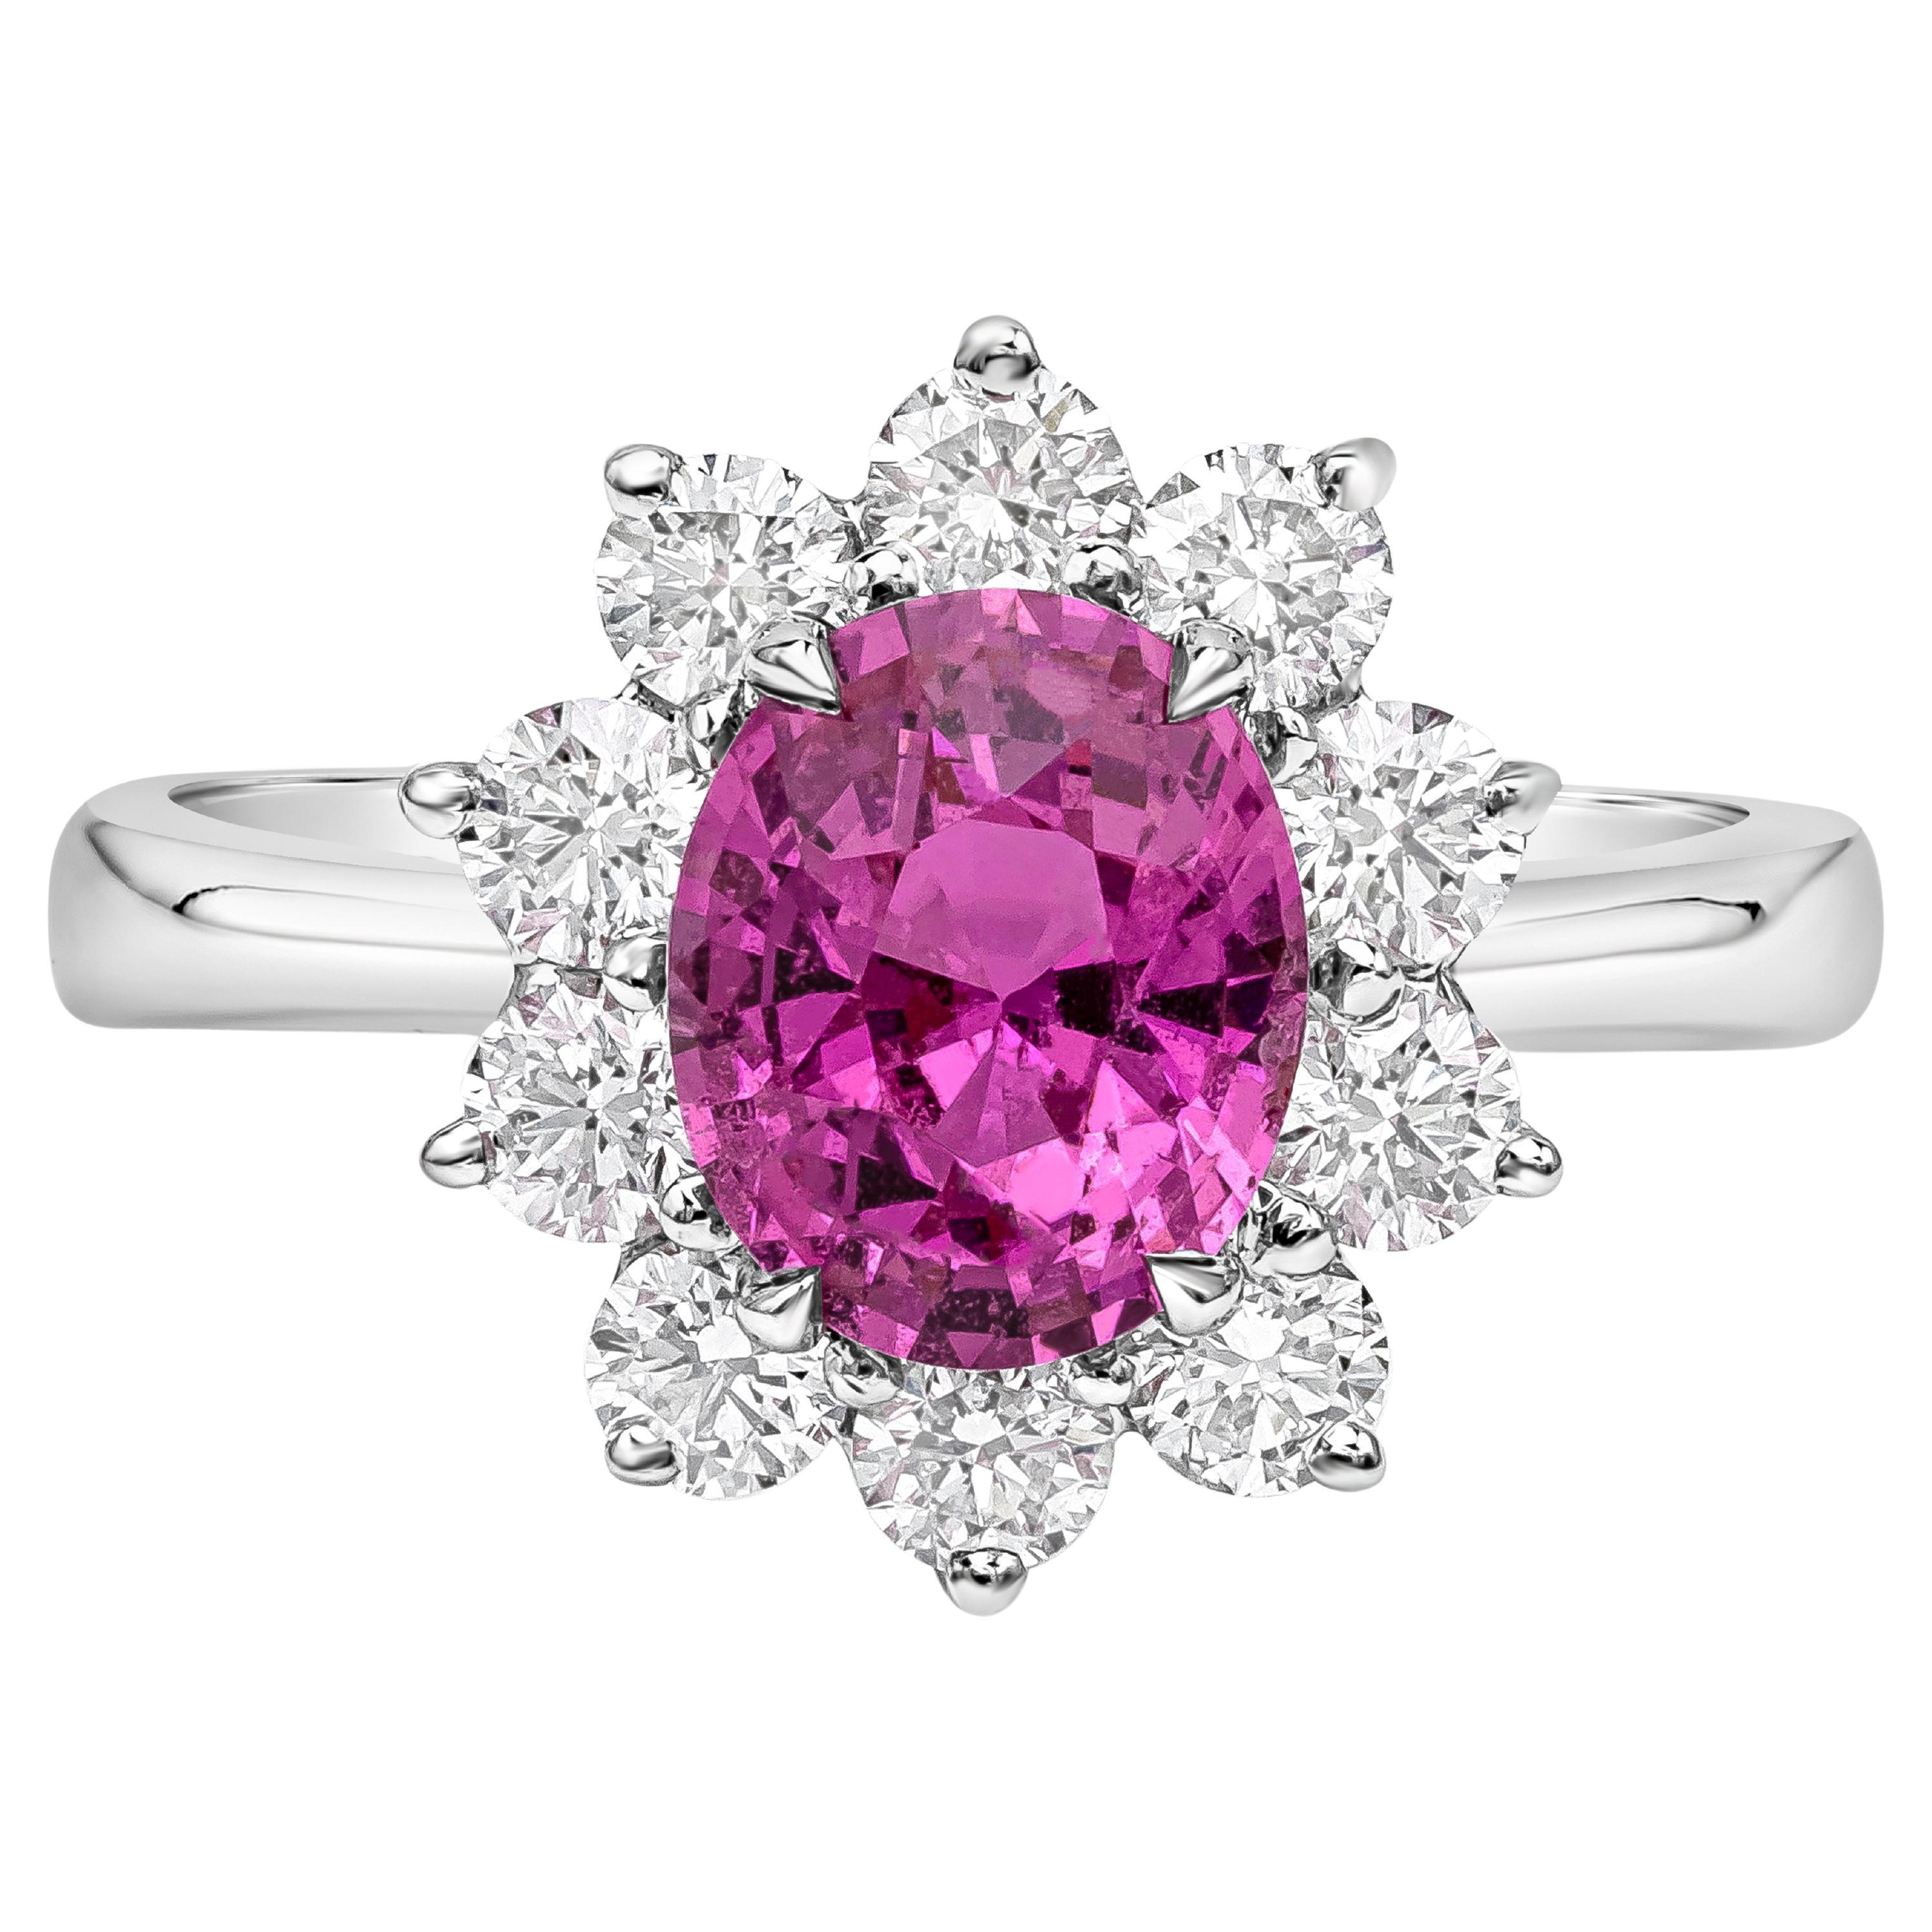 Roman Malakov 1.89 Carat Oval Pink Sapphire with Diamonds Halo Engagement Ring For Sale